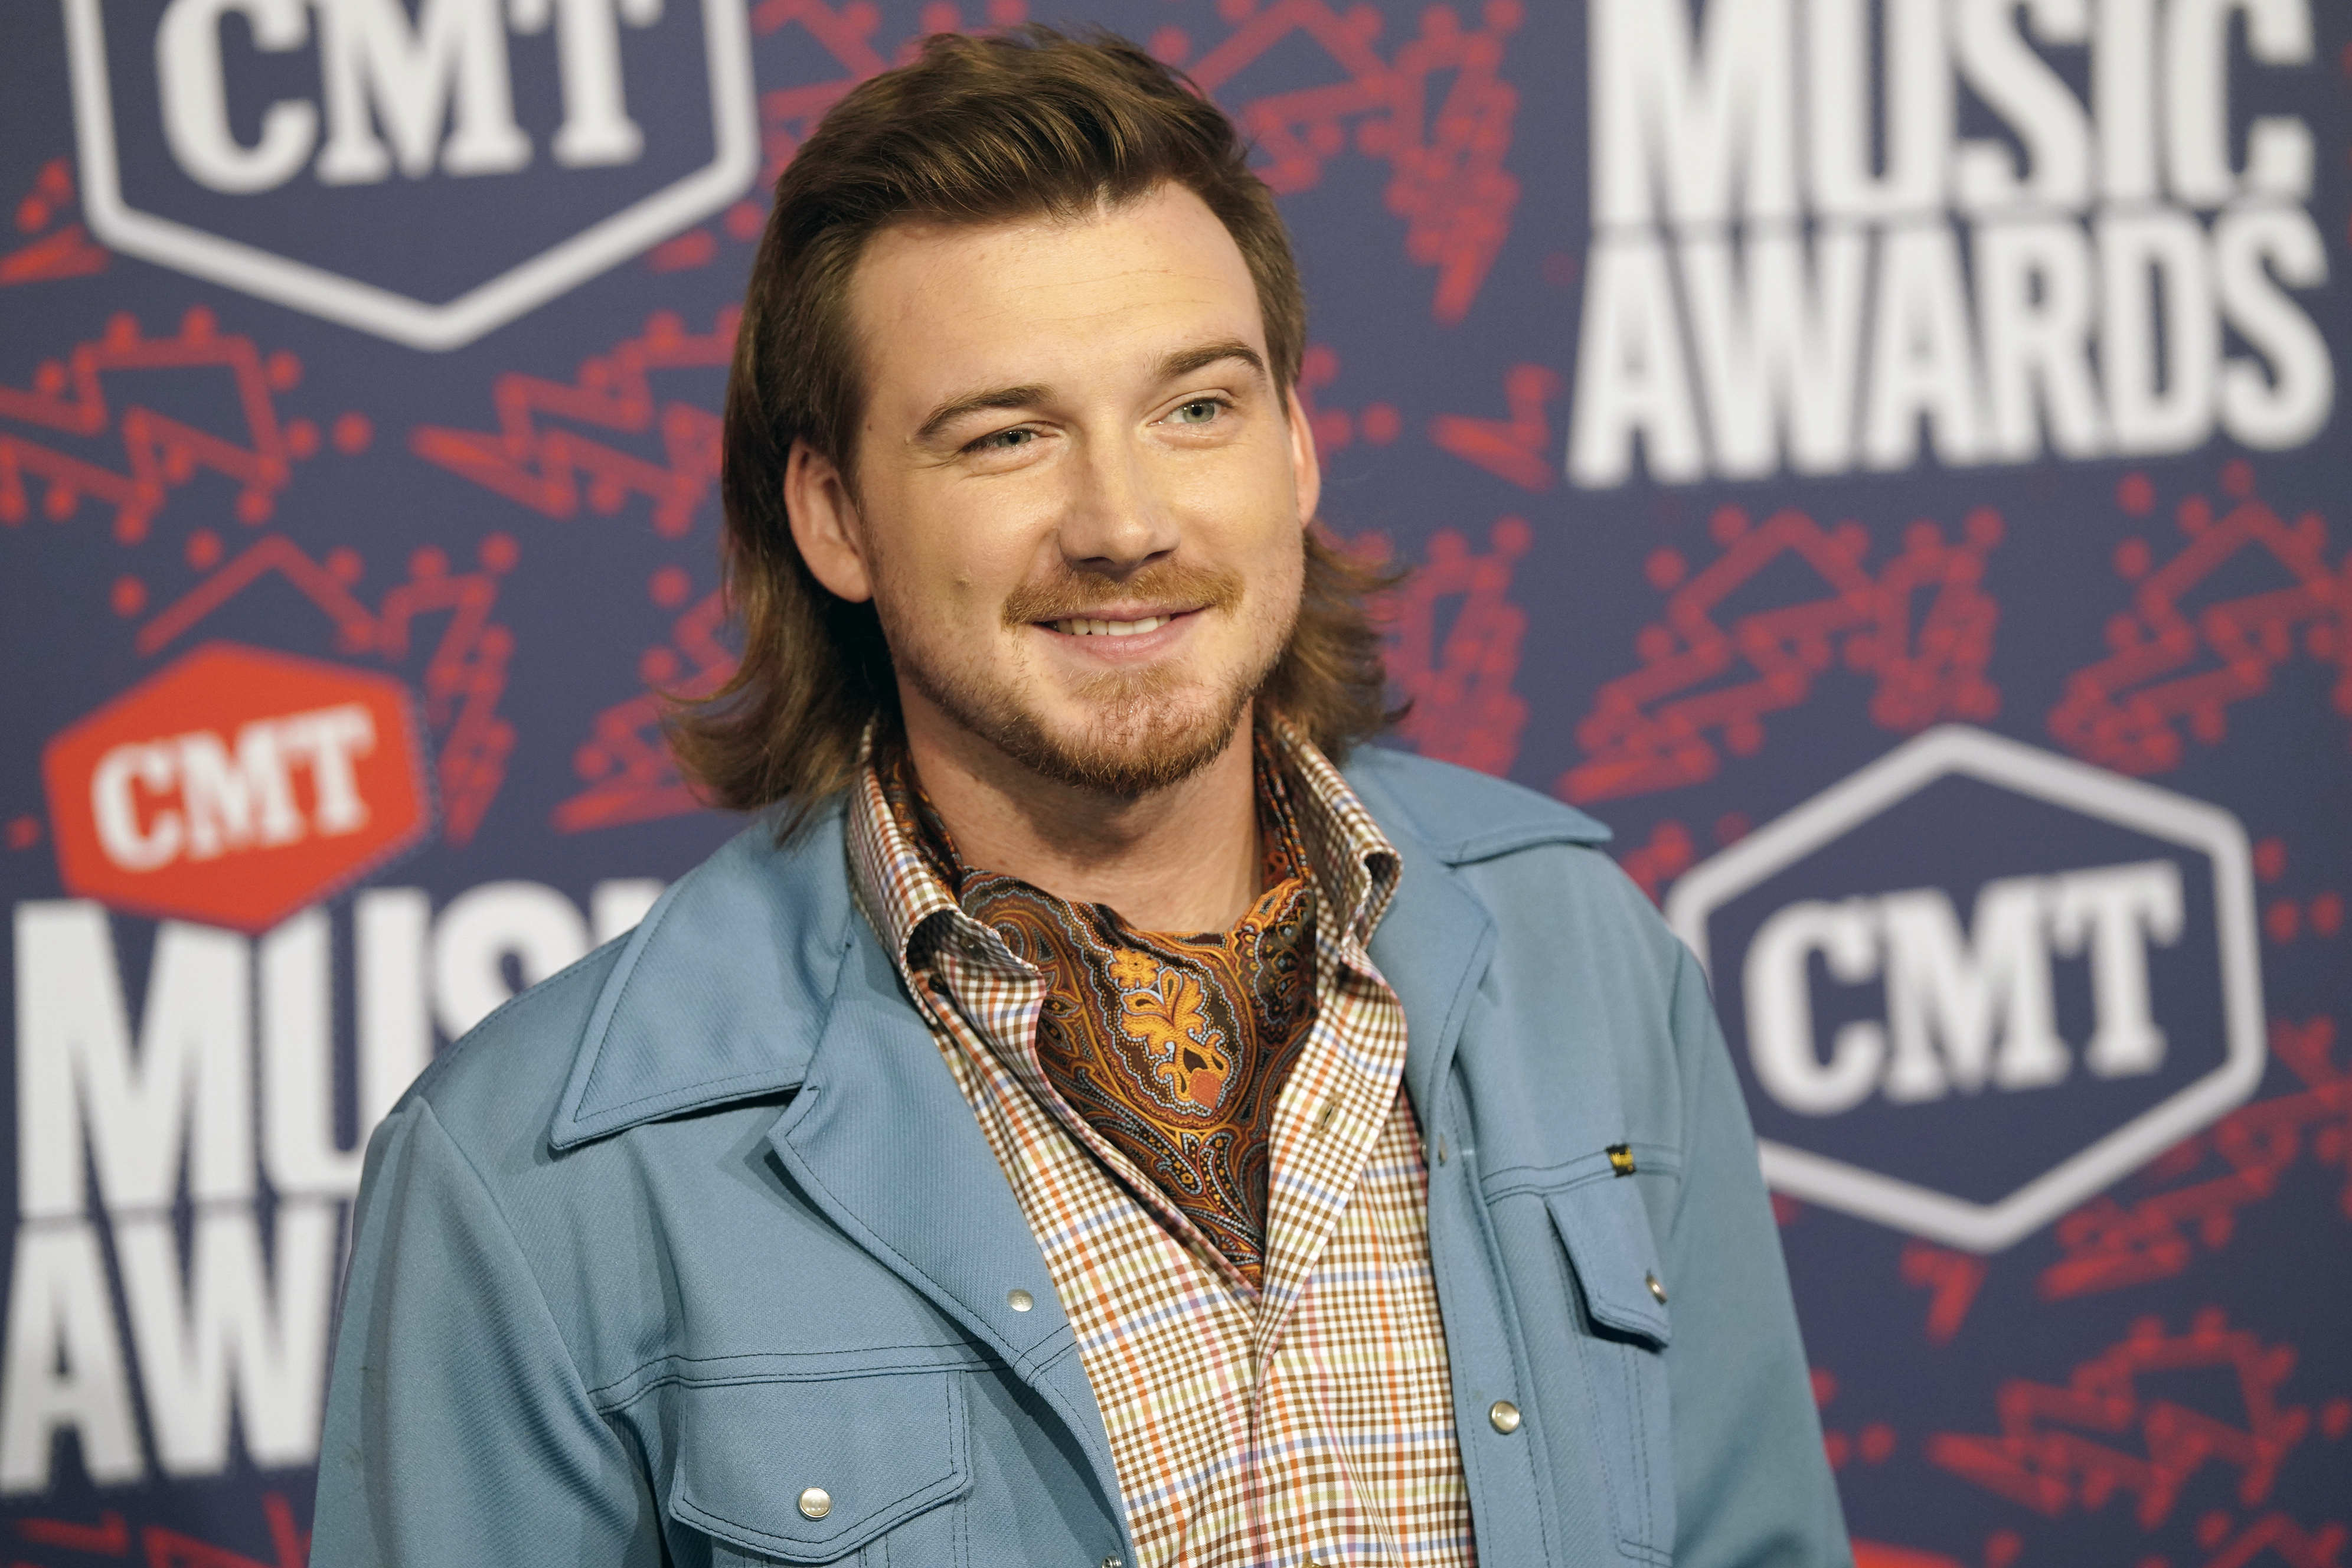 Morgan Wallen arrives at the CMT Music Awards in Nashville, Tennessee on June 5, 2019